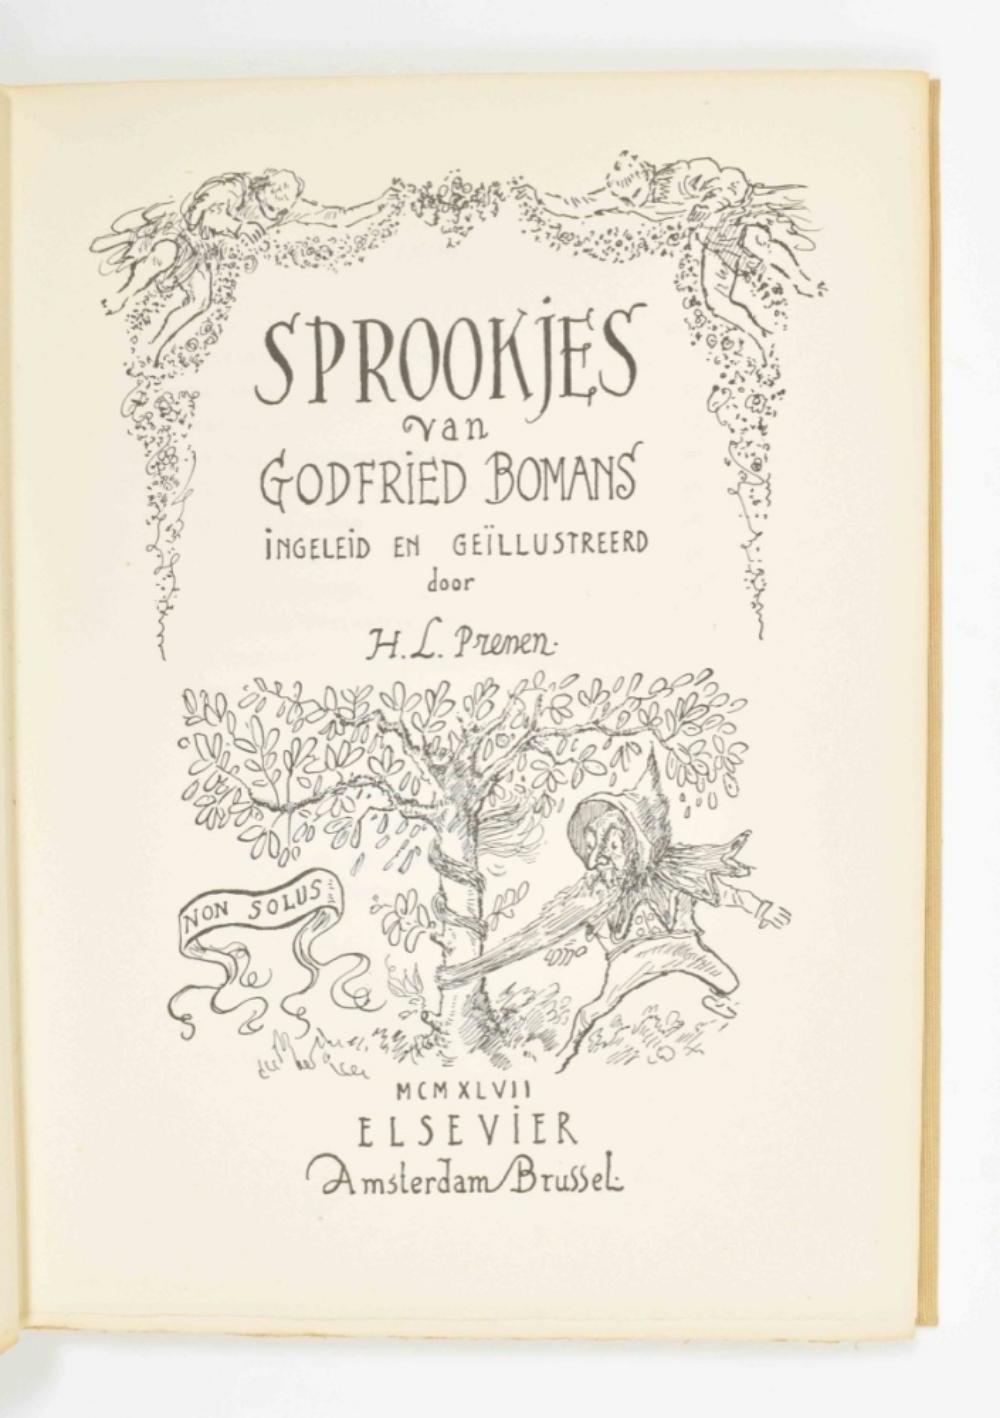 Godfried Bomans. Five titles: Sprookjes - Image 8 of 10